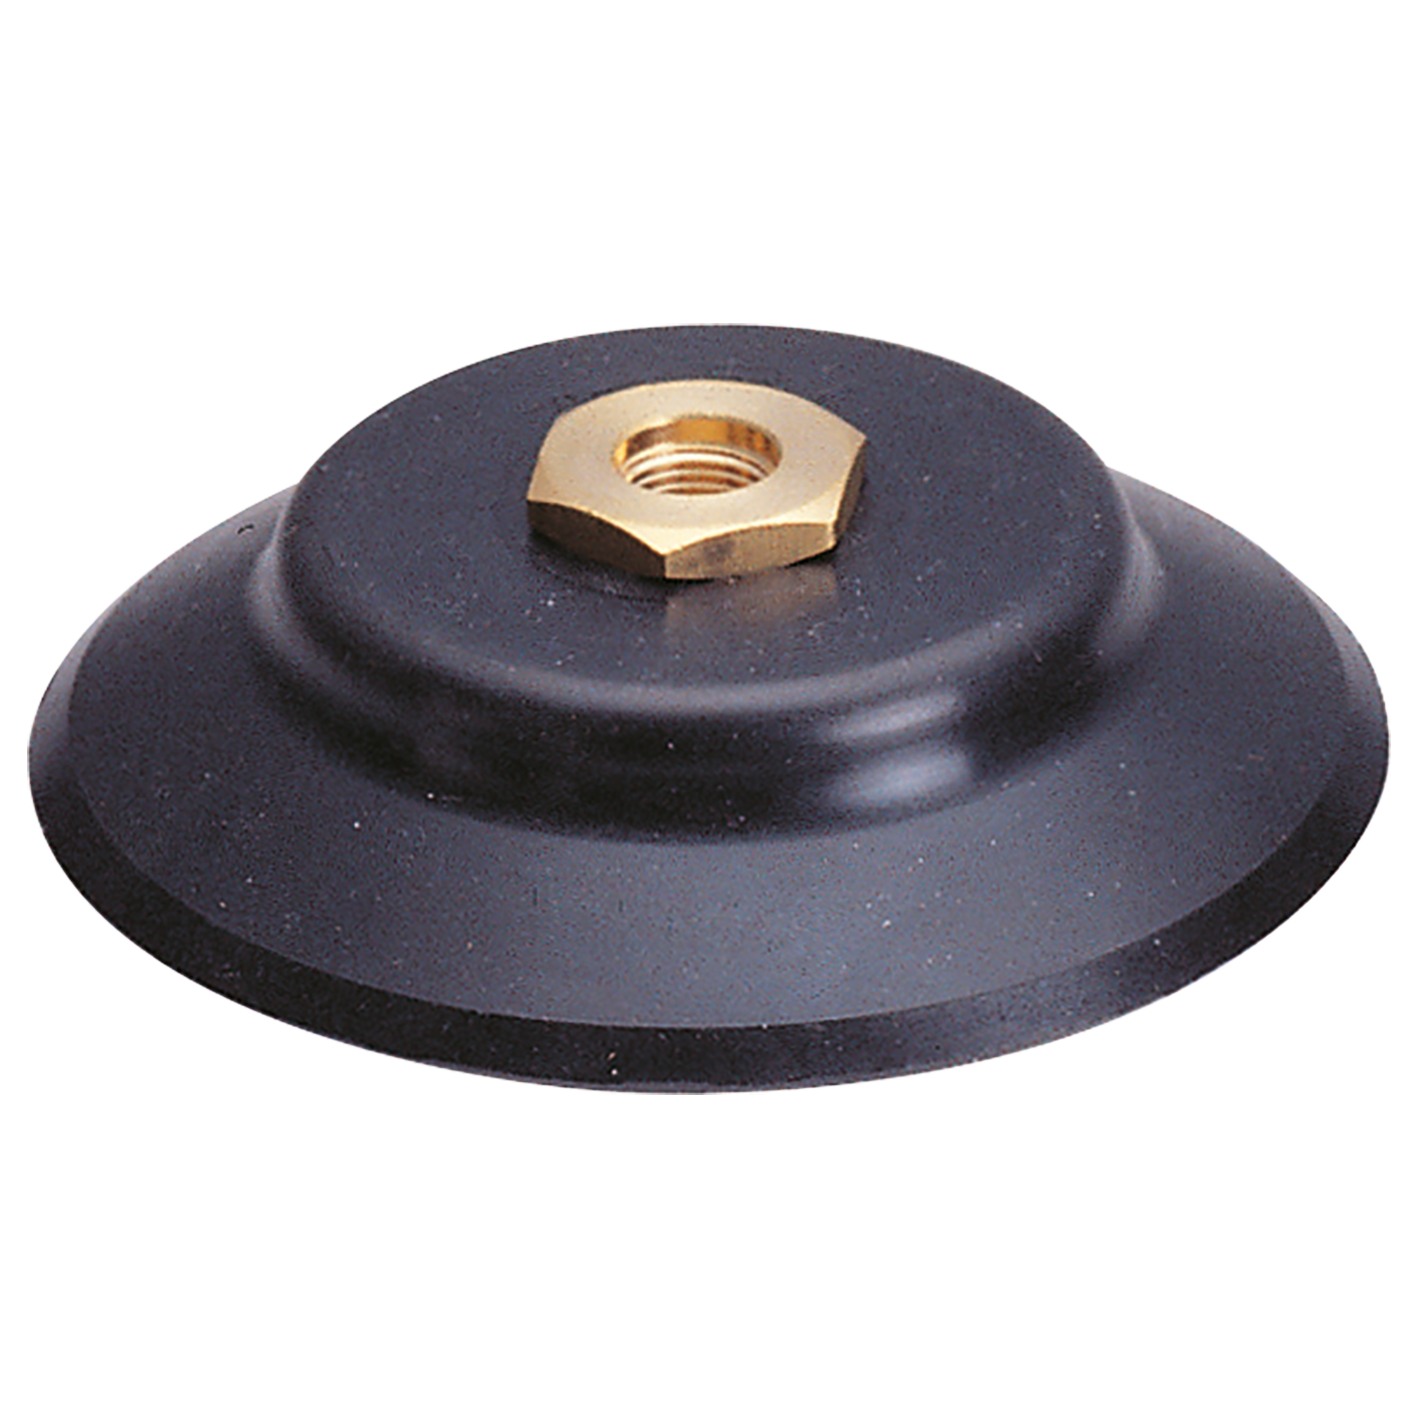 30MM FLAT SUCTION CUP